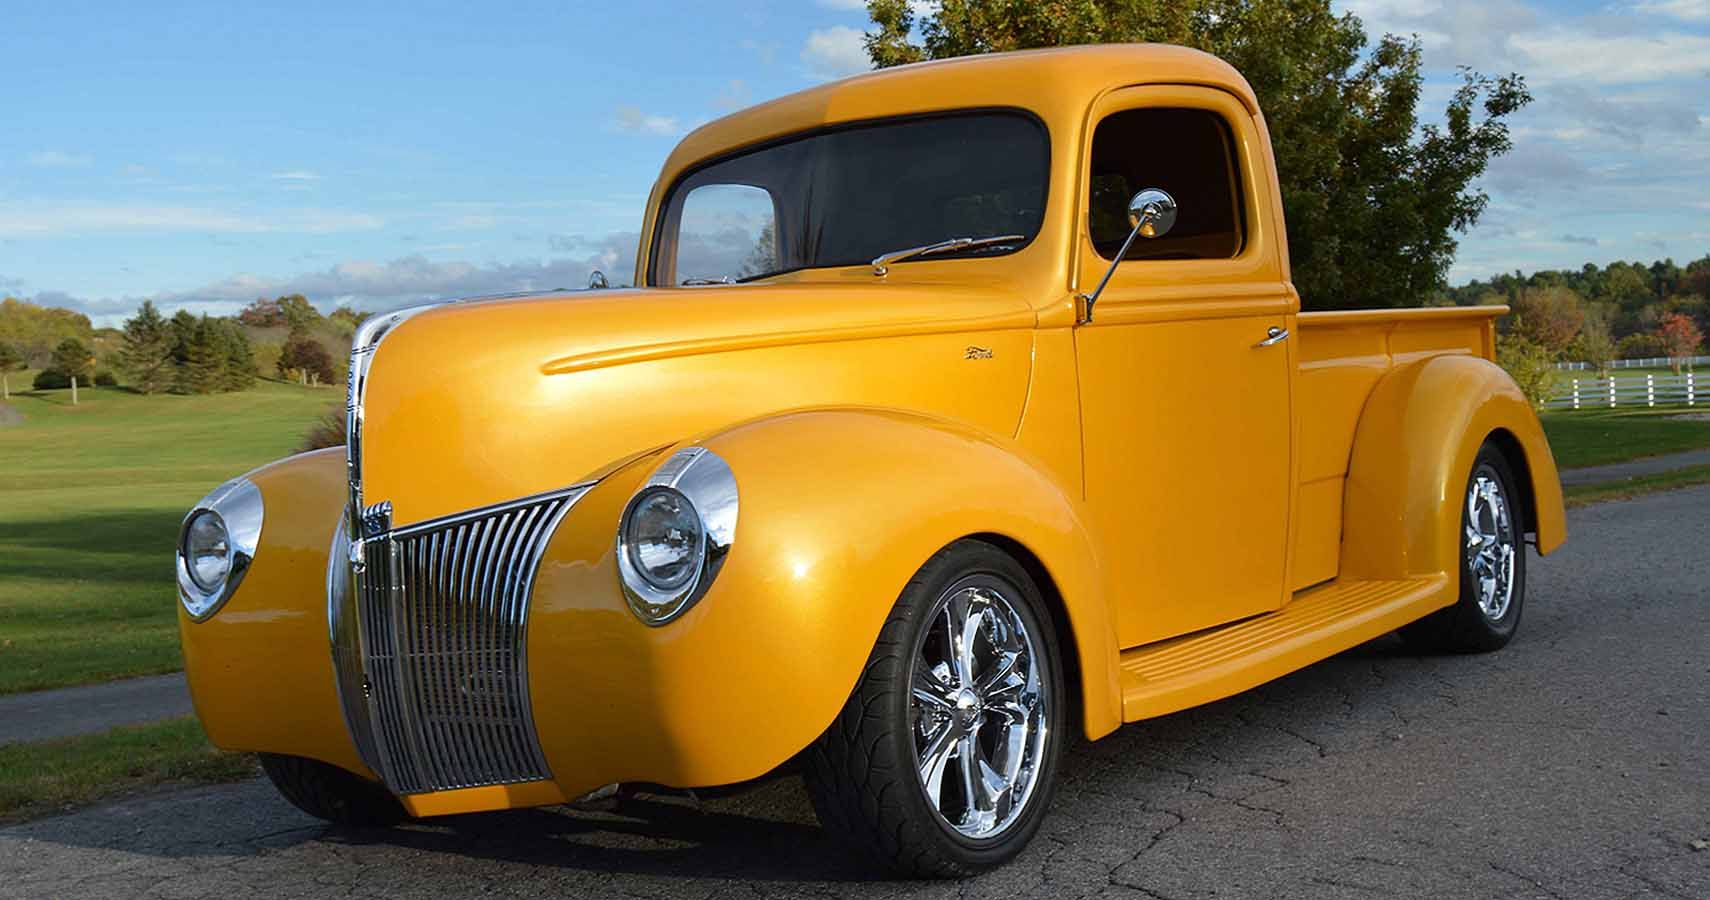 A Stunning 1940 Ford Pickup